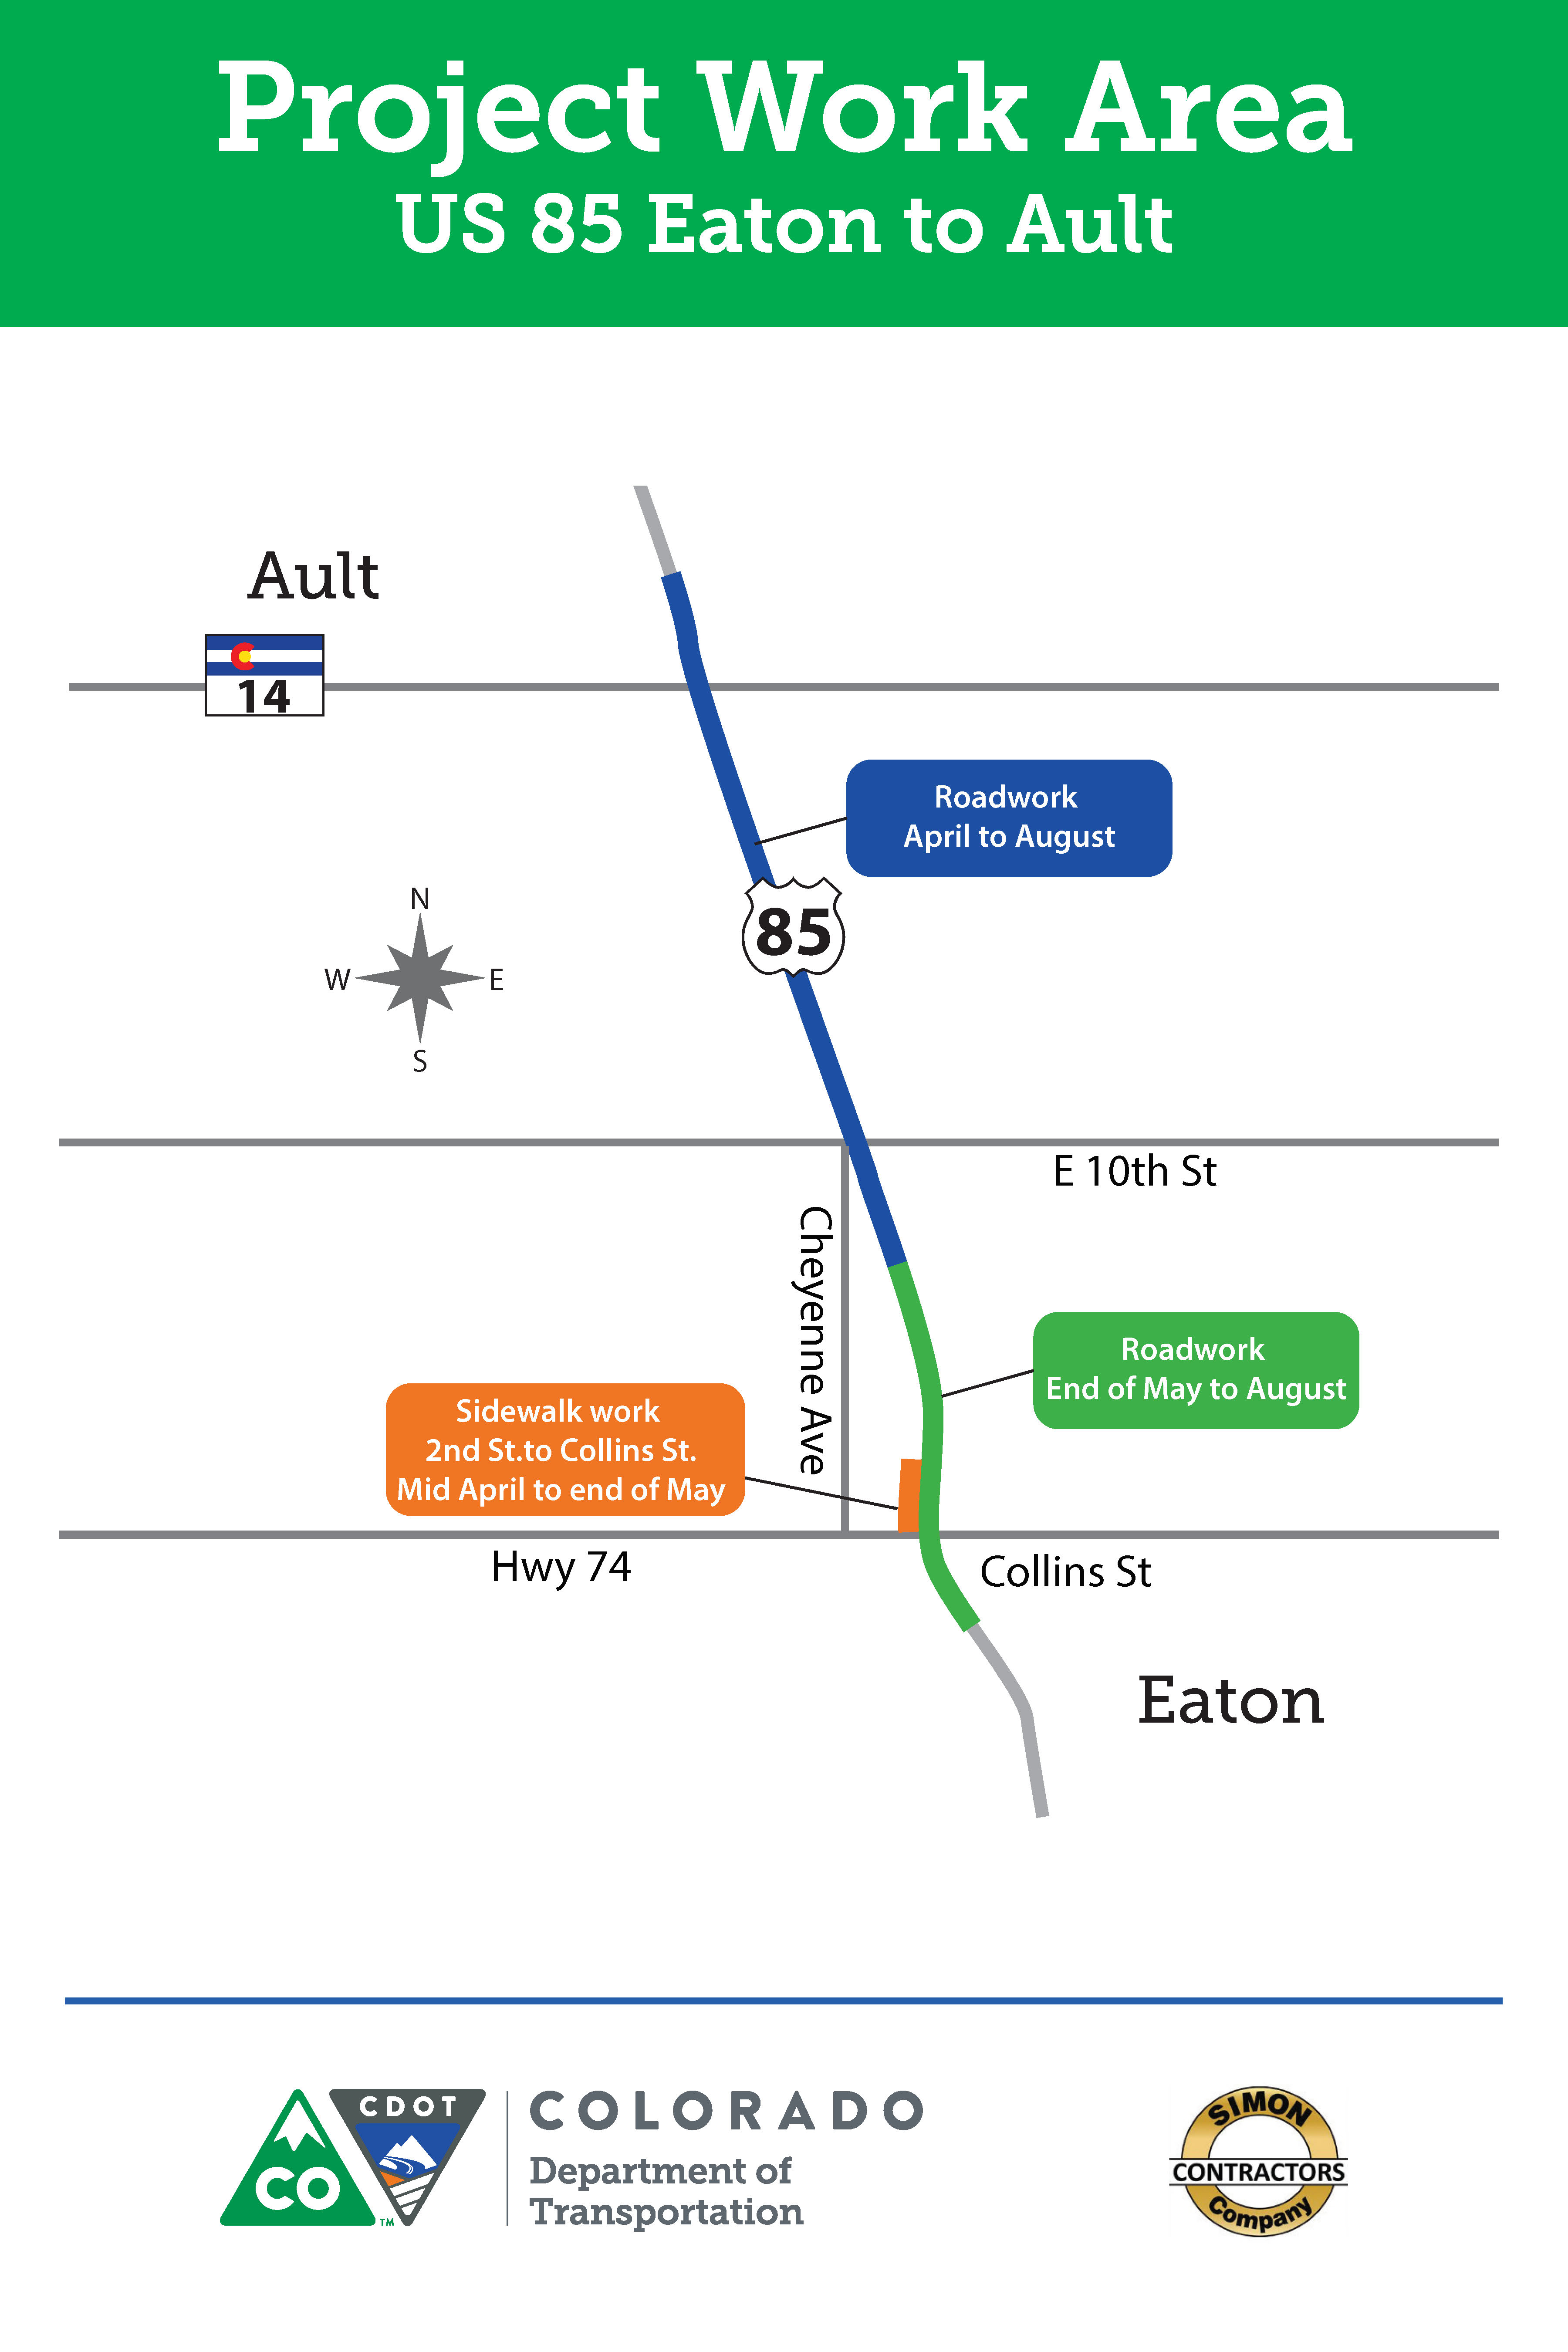 Map Work Area of US 85 Eaton to Ault - November 2017 detail image